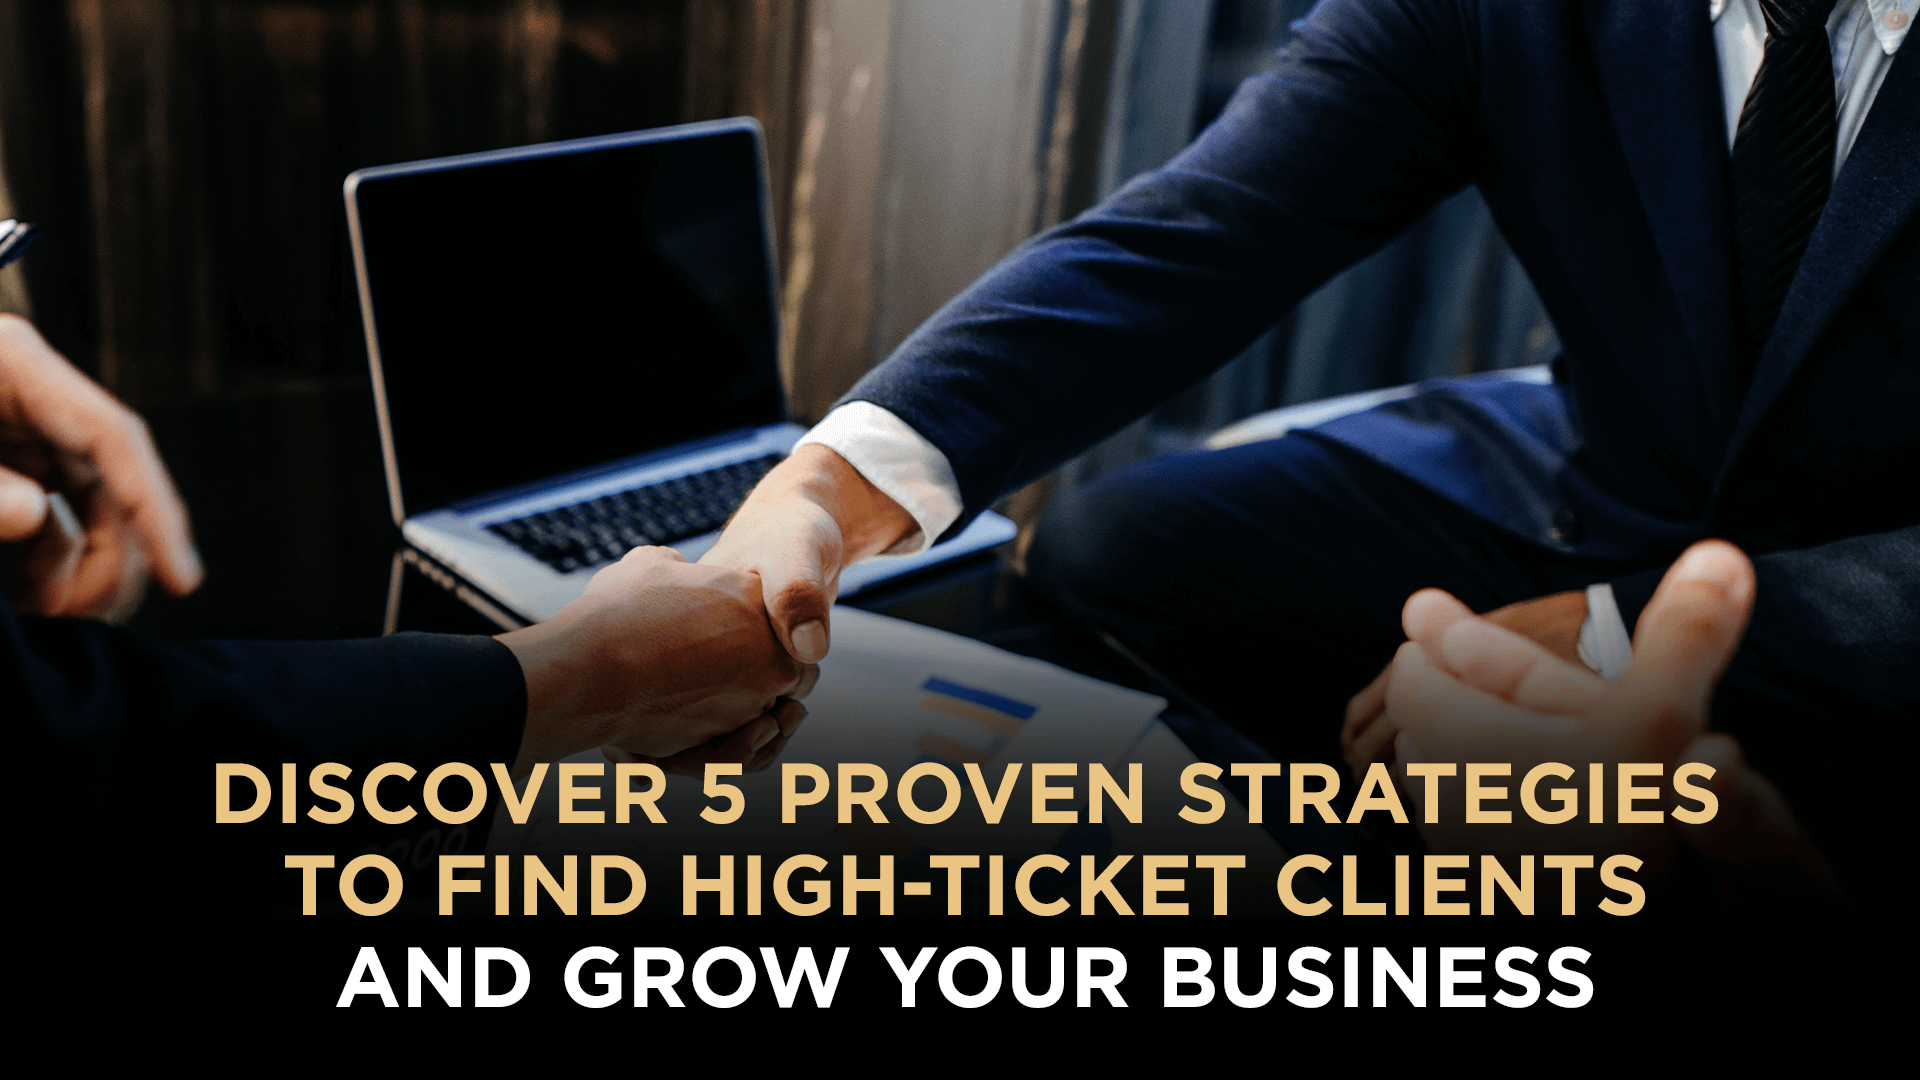 Discover 5 Proven Strategies to Find High-Ticket Clients